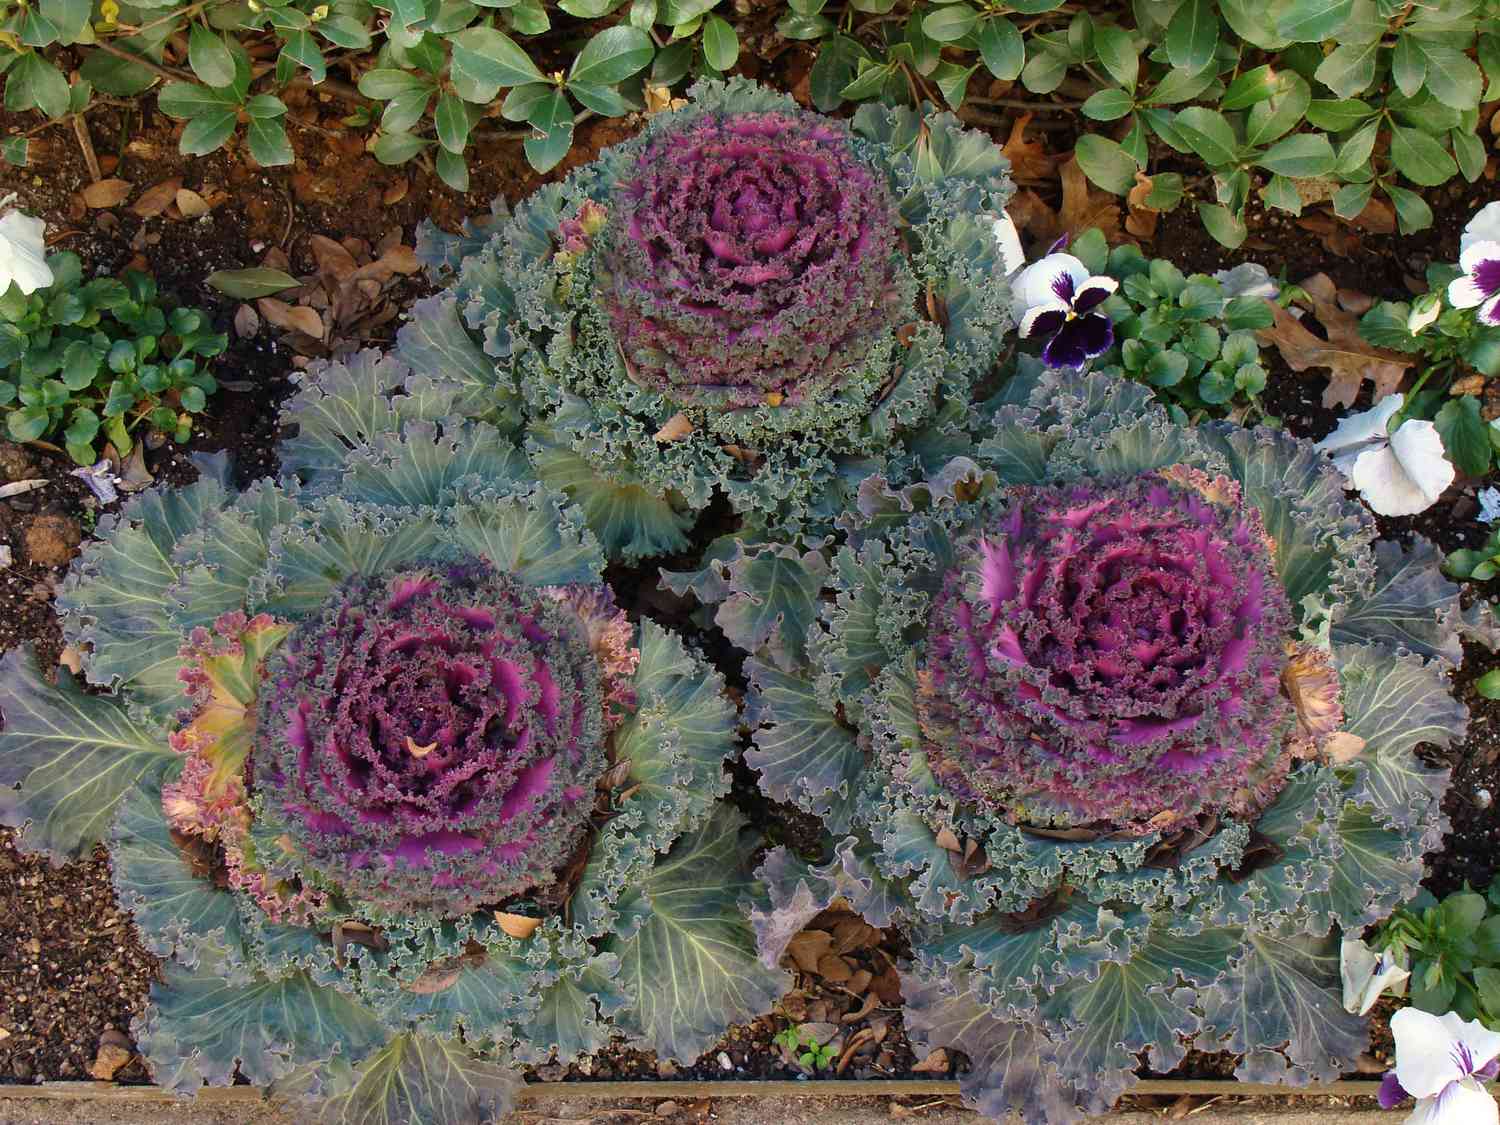 'Rose Bouquet' ornamental cabbage with pink centers